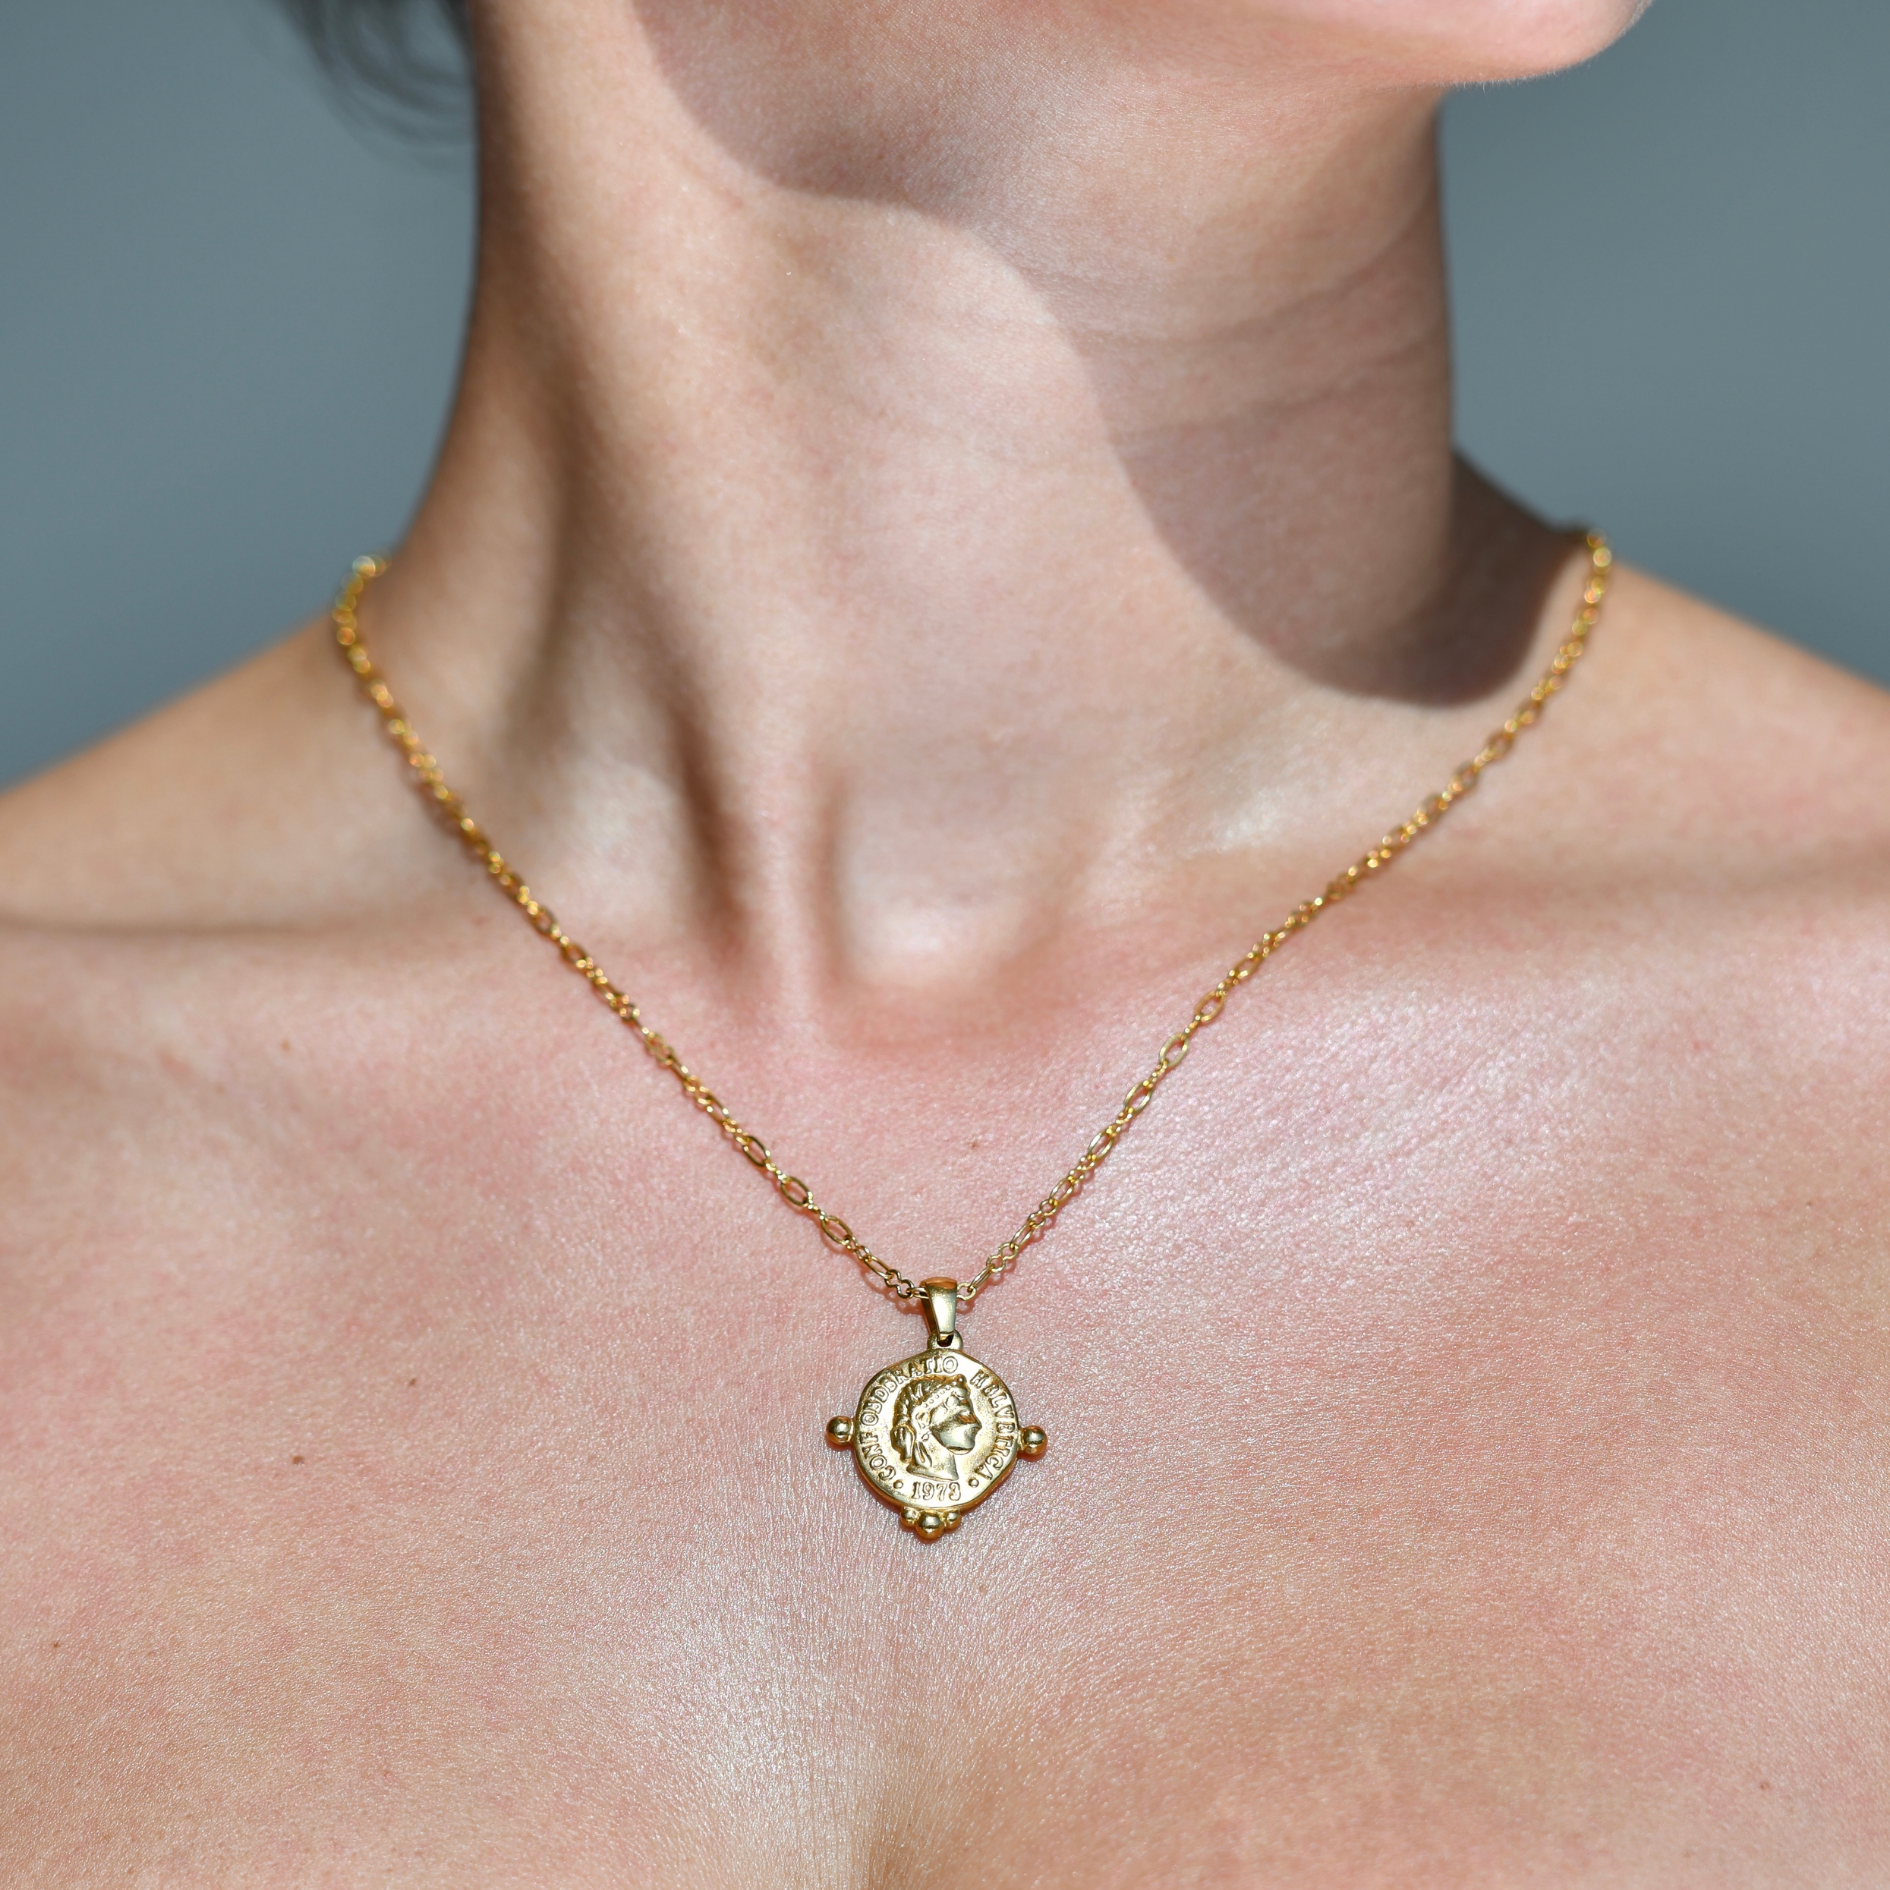 Gold chain necklace in the shape of baroque gold coin with a royal head in his surface. Irregular shape. Dynasty Coin Gol Pendant Necklace.